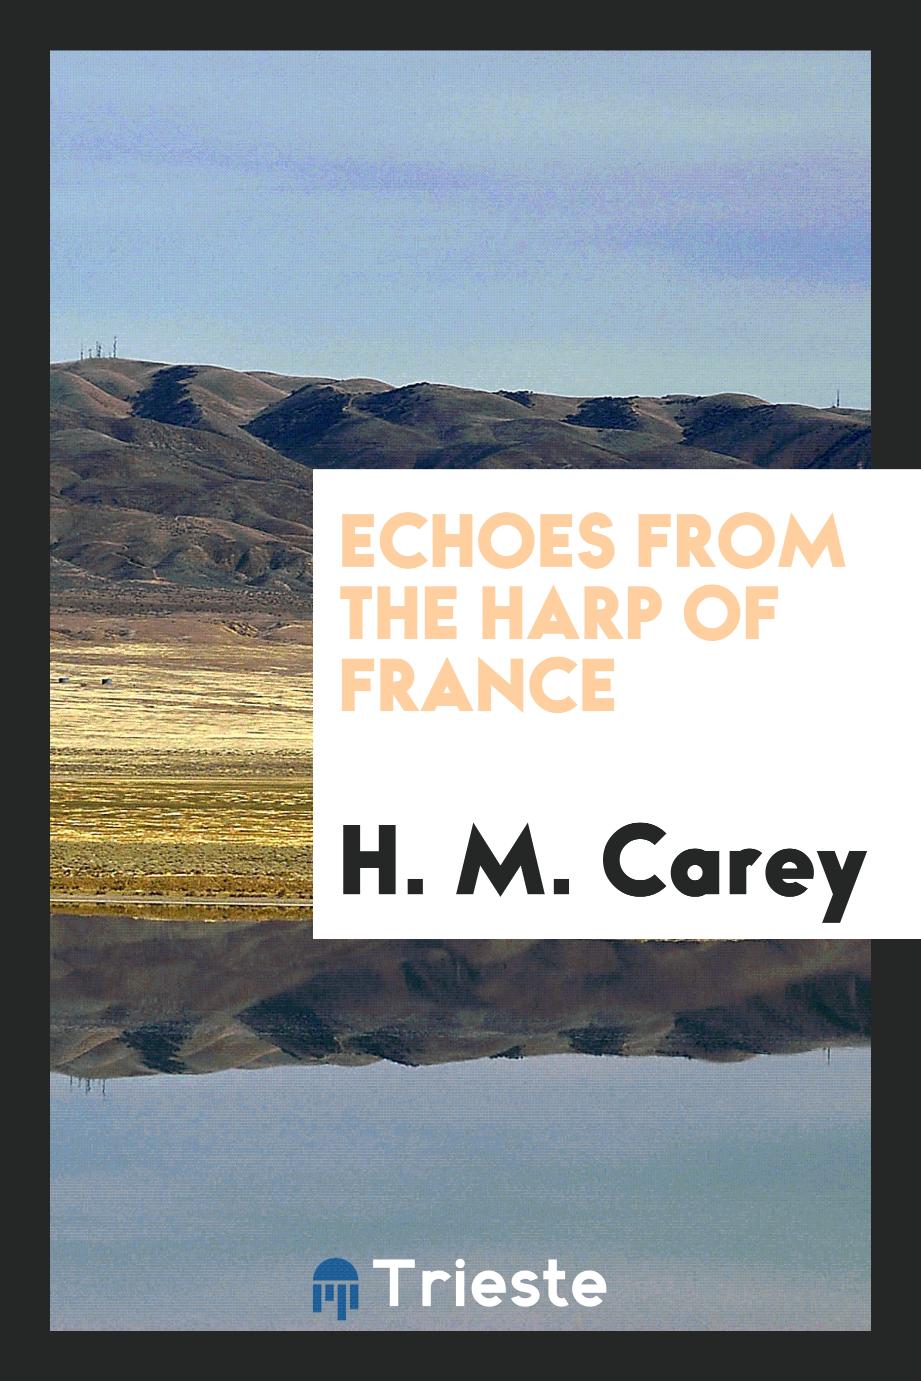 Echoes from the Harp of France